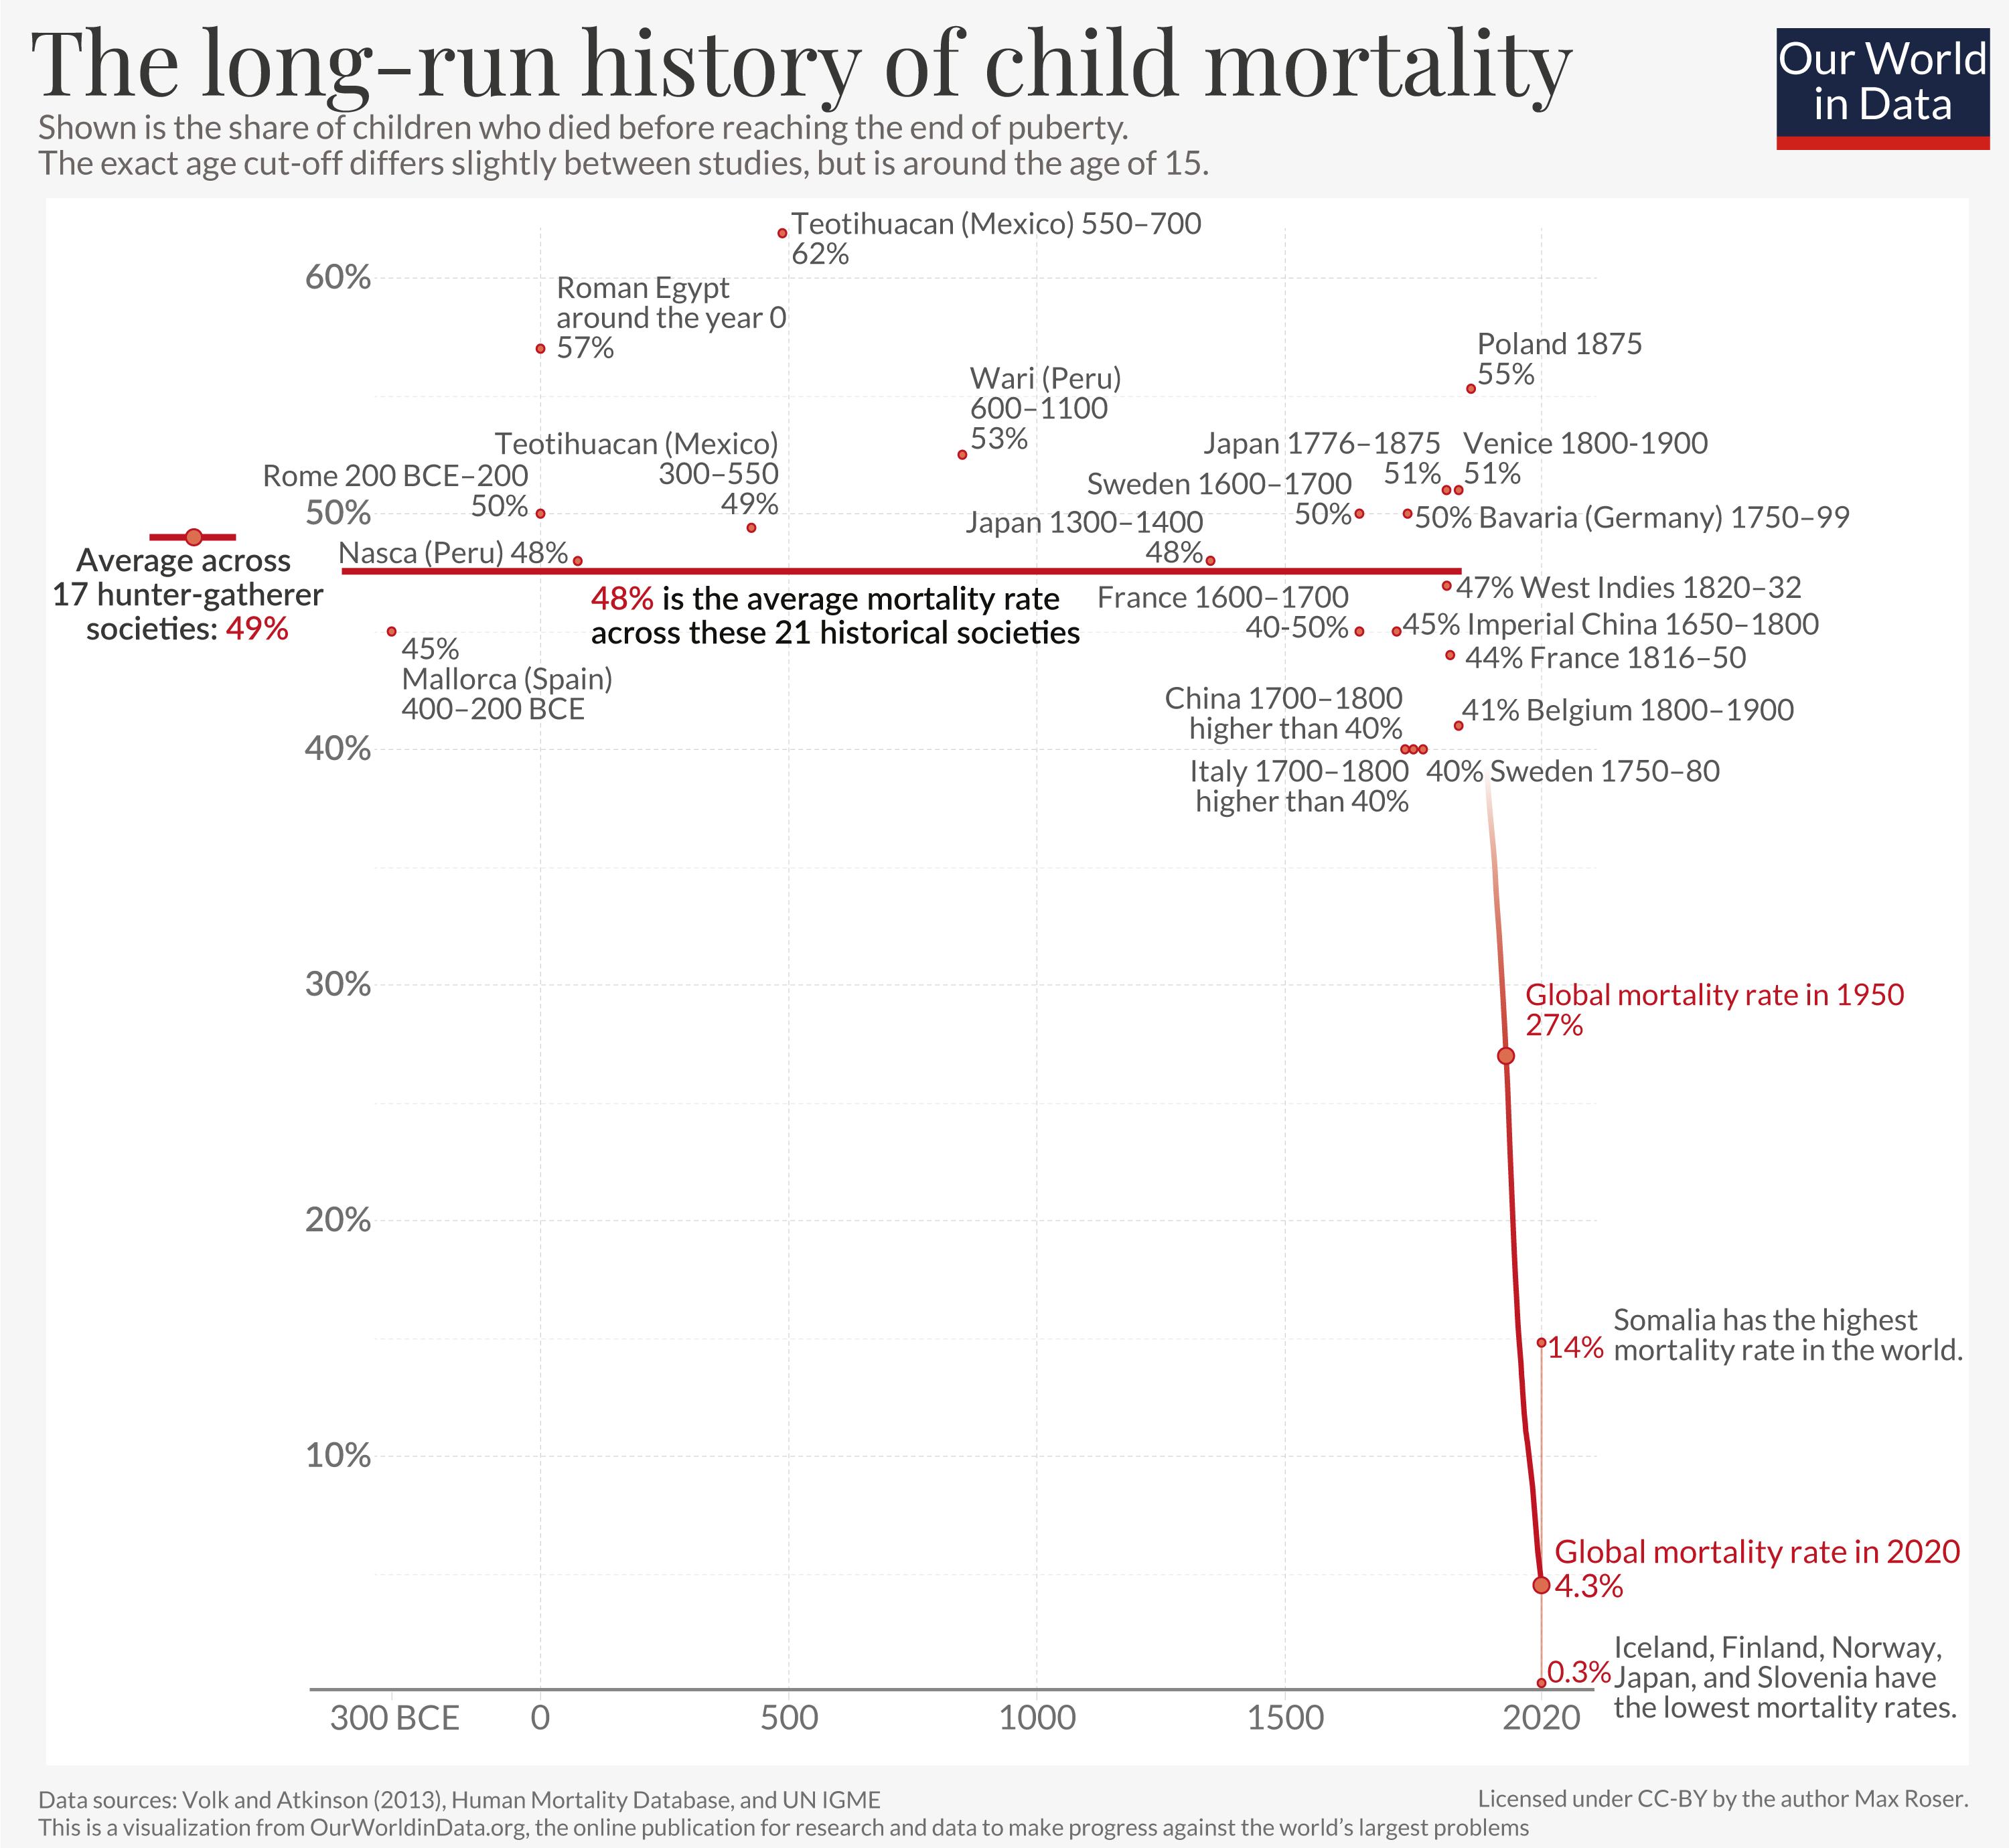 A chart showing child mortality over time, from 300 BCE to now. Until roughly 1800, child mortality was about 50%, so half of children died before the age of five. Then it plummeted, and it’s now at 4.3%.